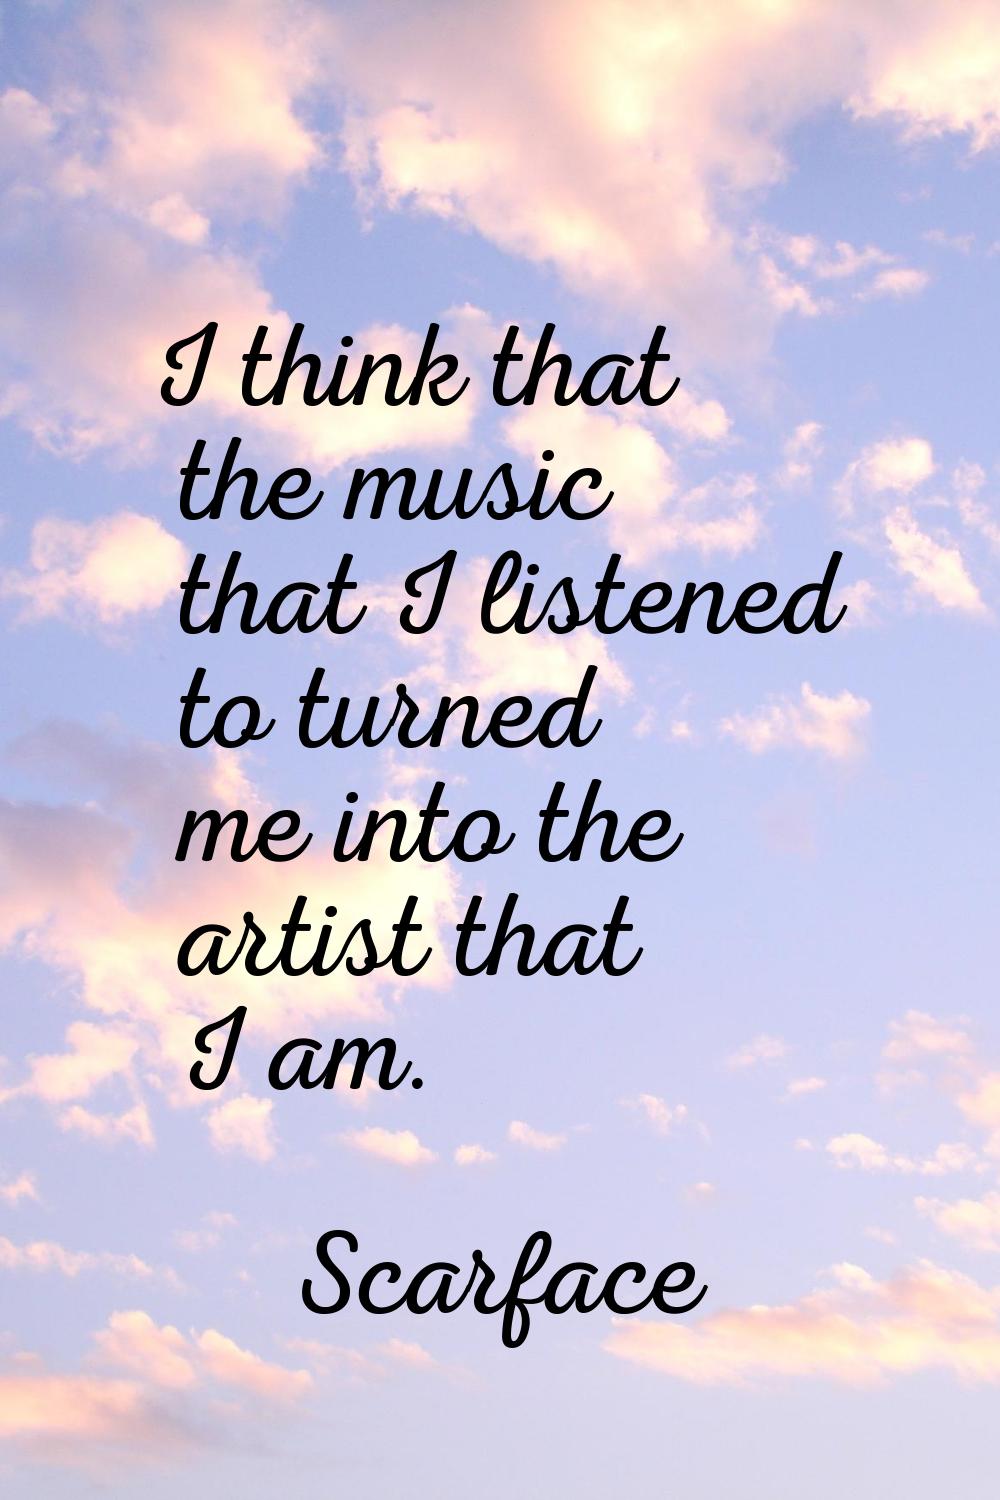 I think that the music that I listened to turned me into the artist that I am.